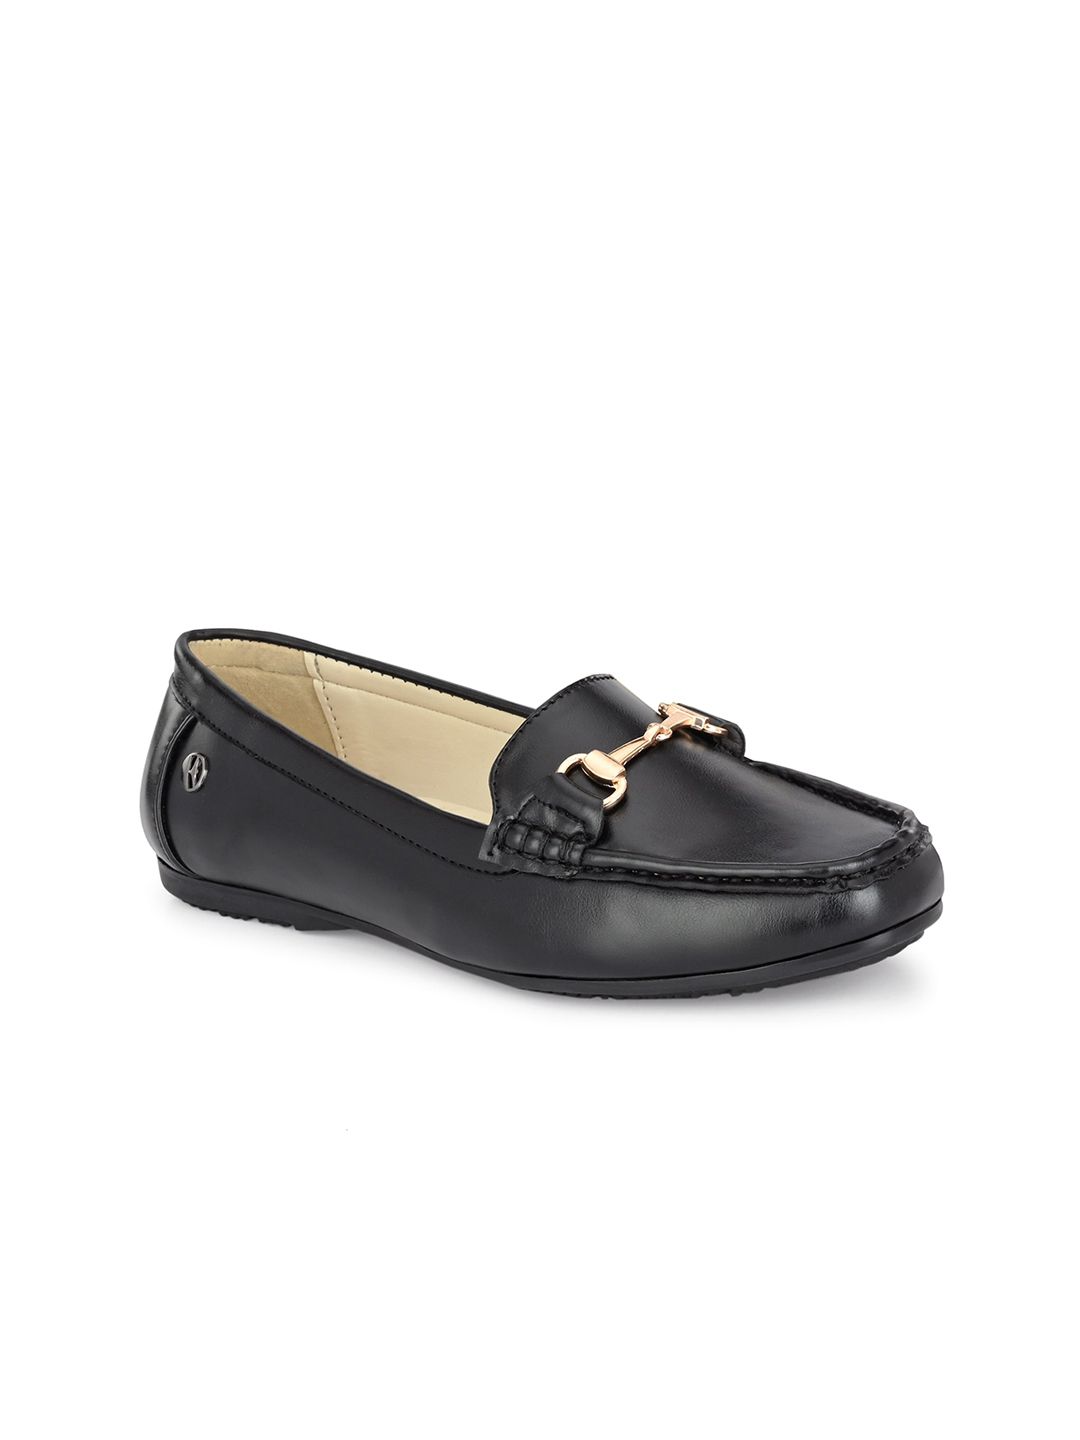 ELLE Women Black Loafers Price in India